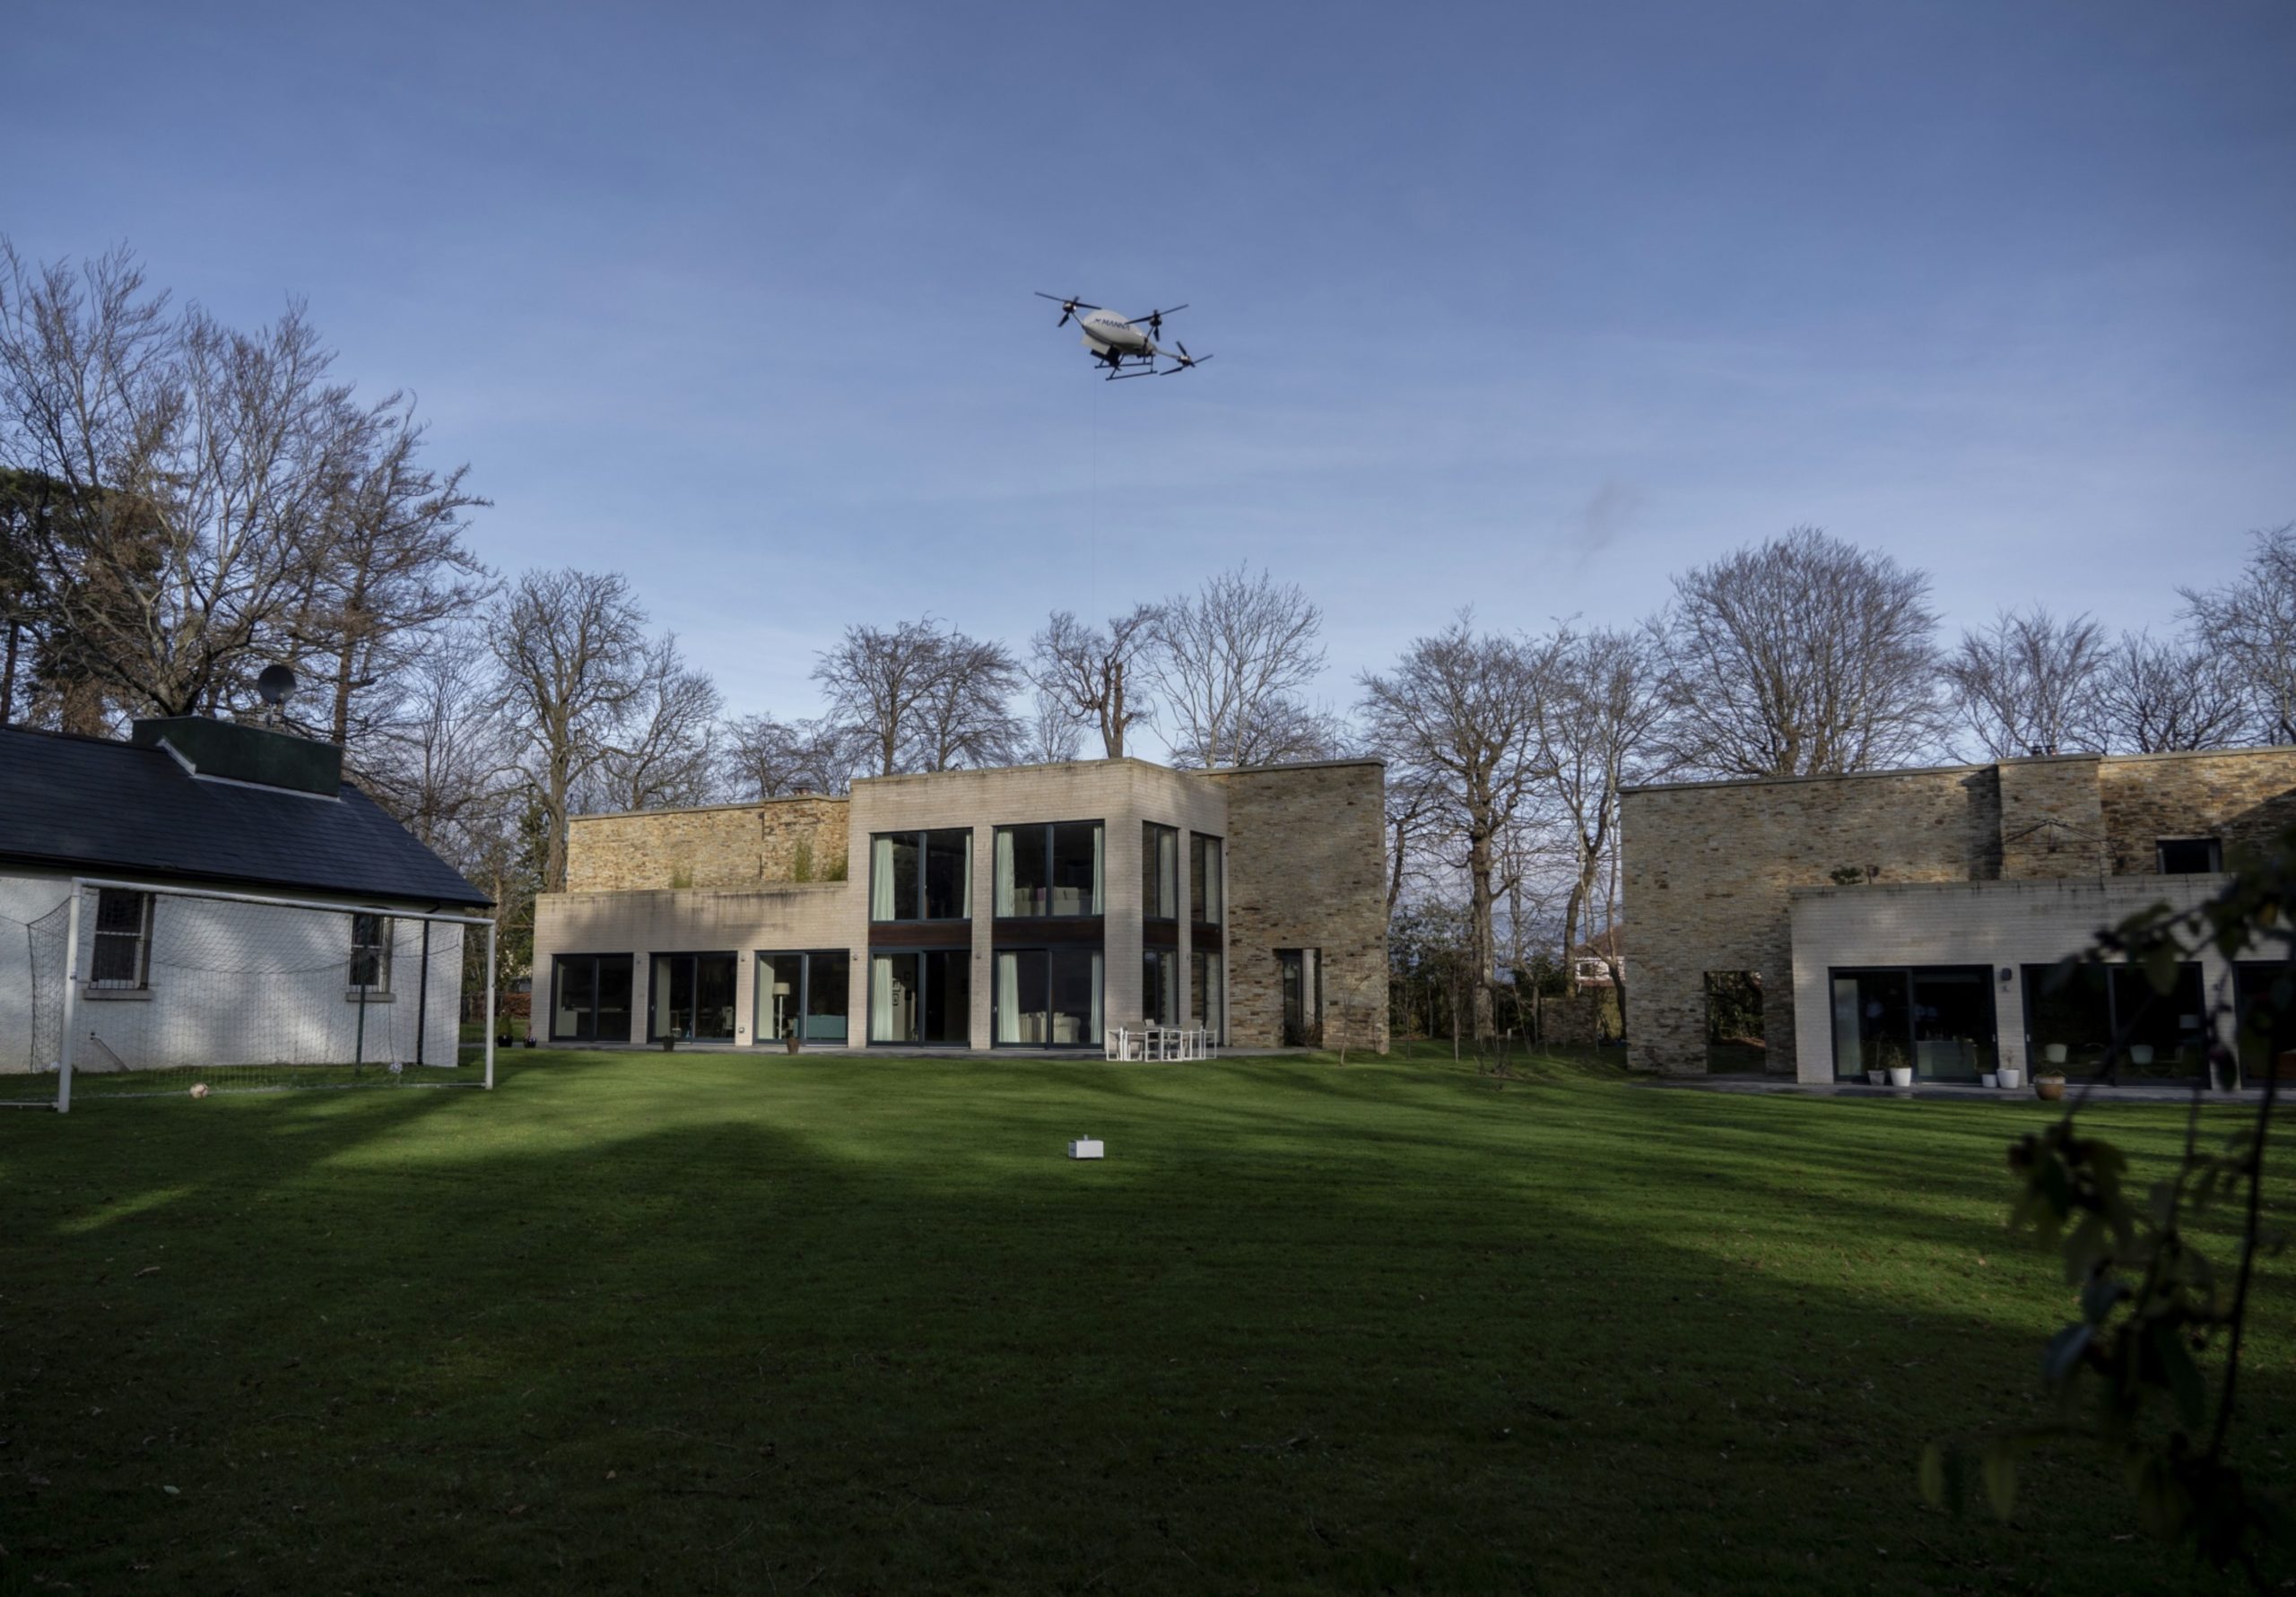 A modular delivery drone designed by Manna Aero, an Ireland-based drone food delivery service, performs a parcel drop during a flight demonstration in the grounds of the house of the company's Chief Executive Officer, Bobby Healy, in south Dublin, Ireland, on Thursday, January 30, 2020. Creator: Paulo Nunes dos Santos
Copyright: © 2020 Bloomberg Finance LP